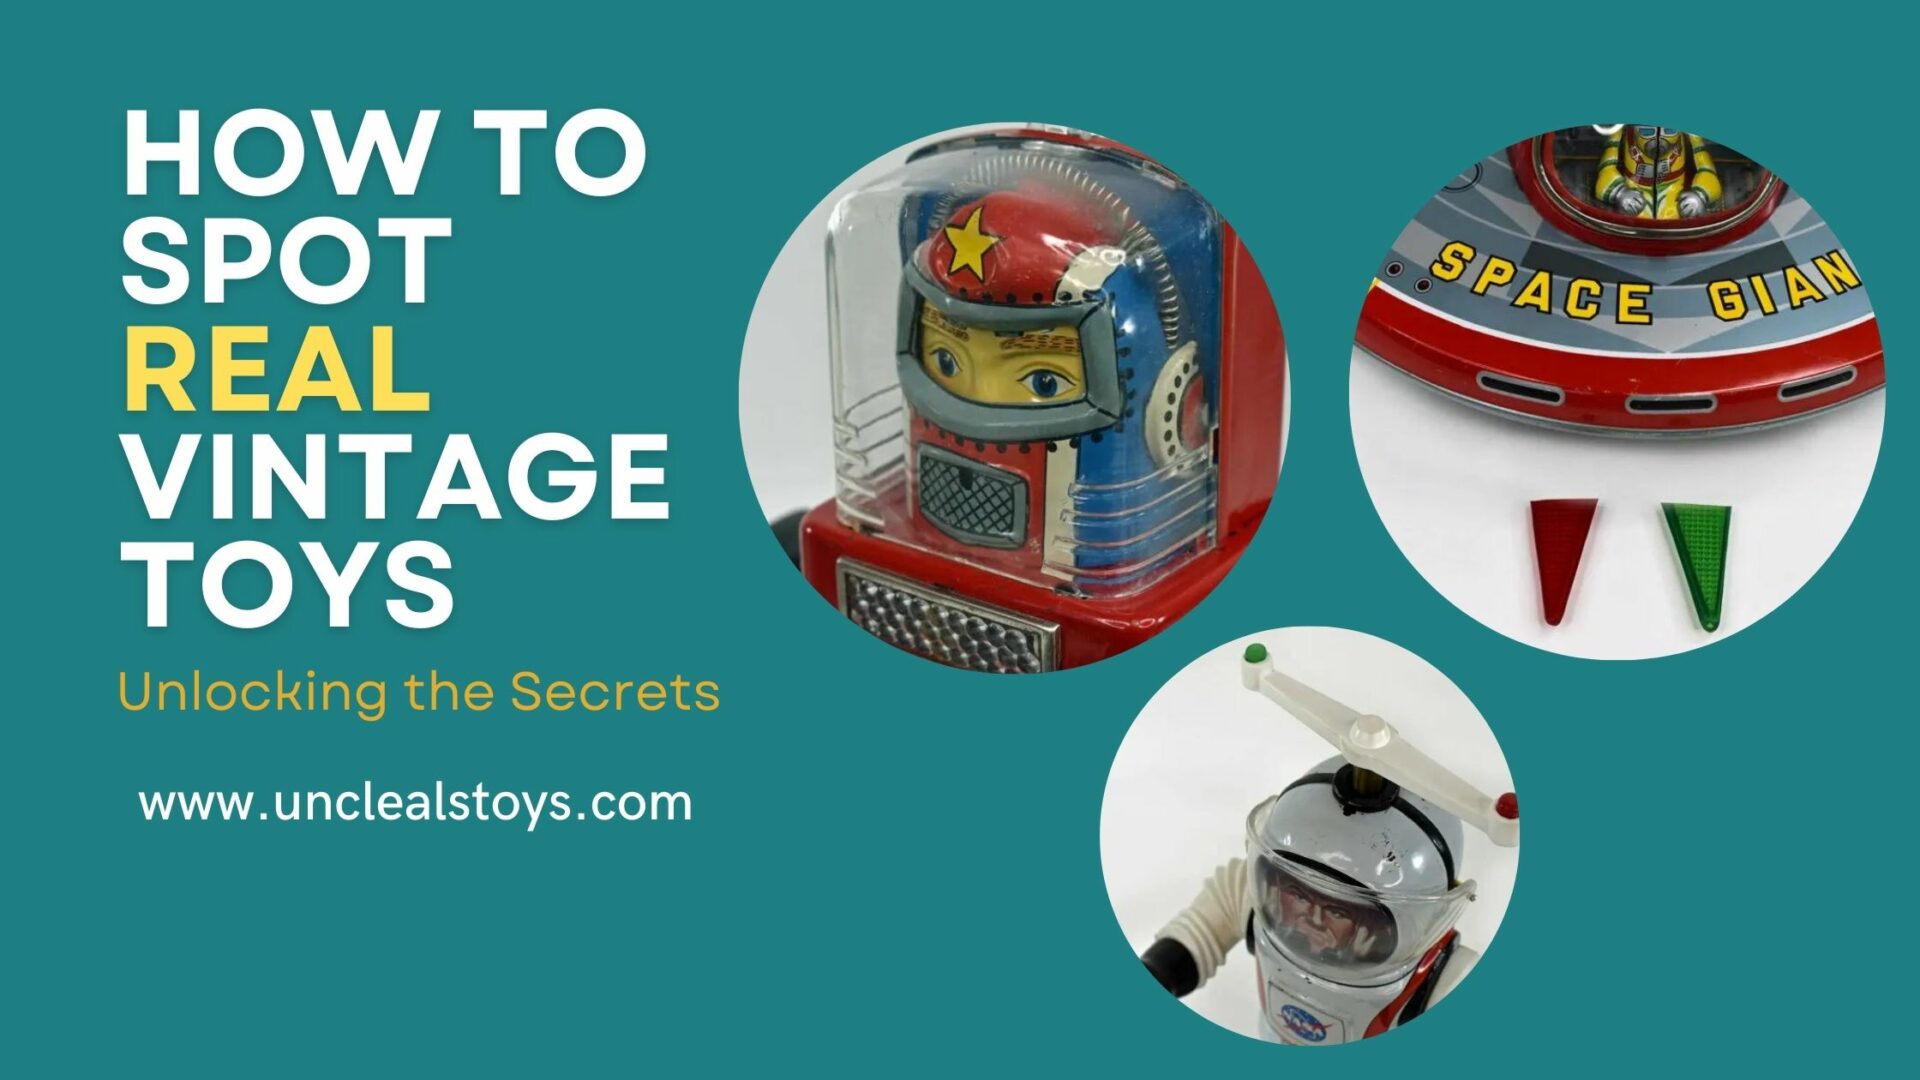 How to Spot Real Vintage Toys